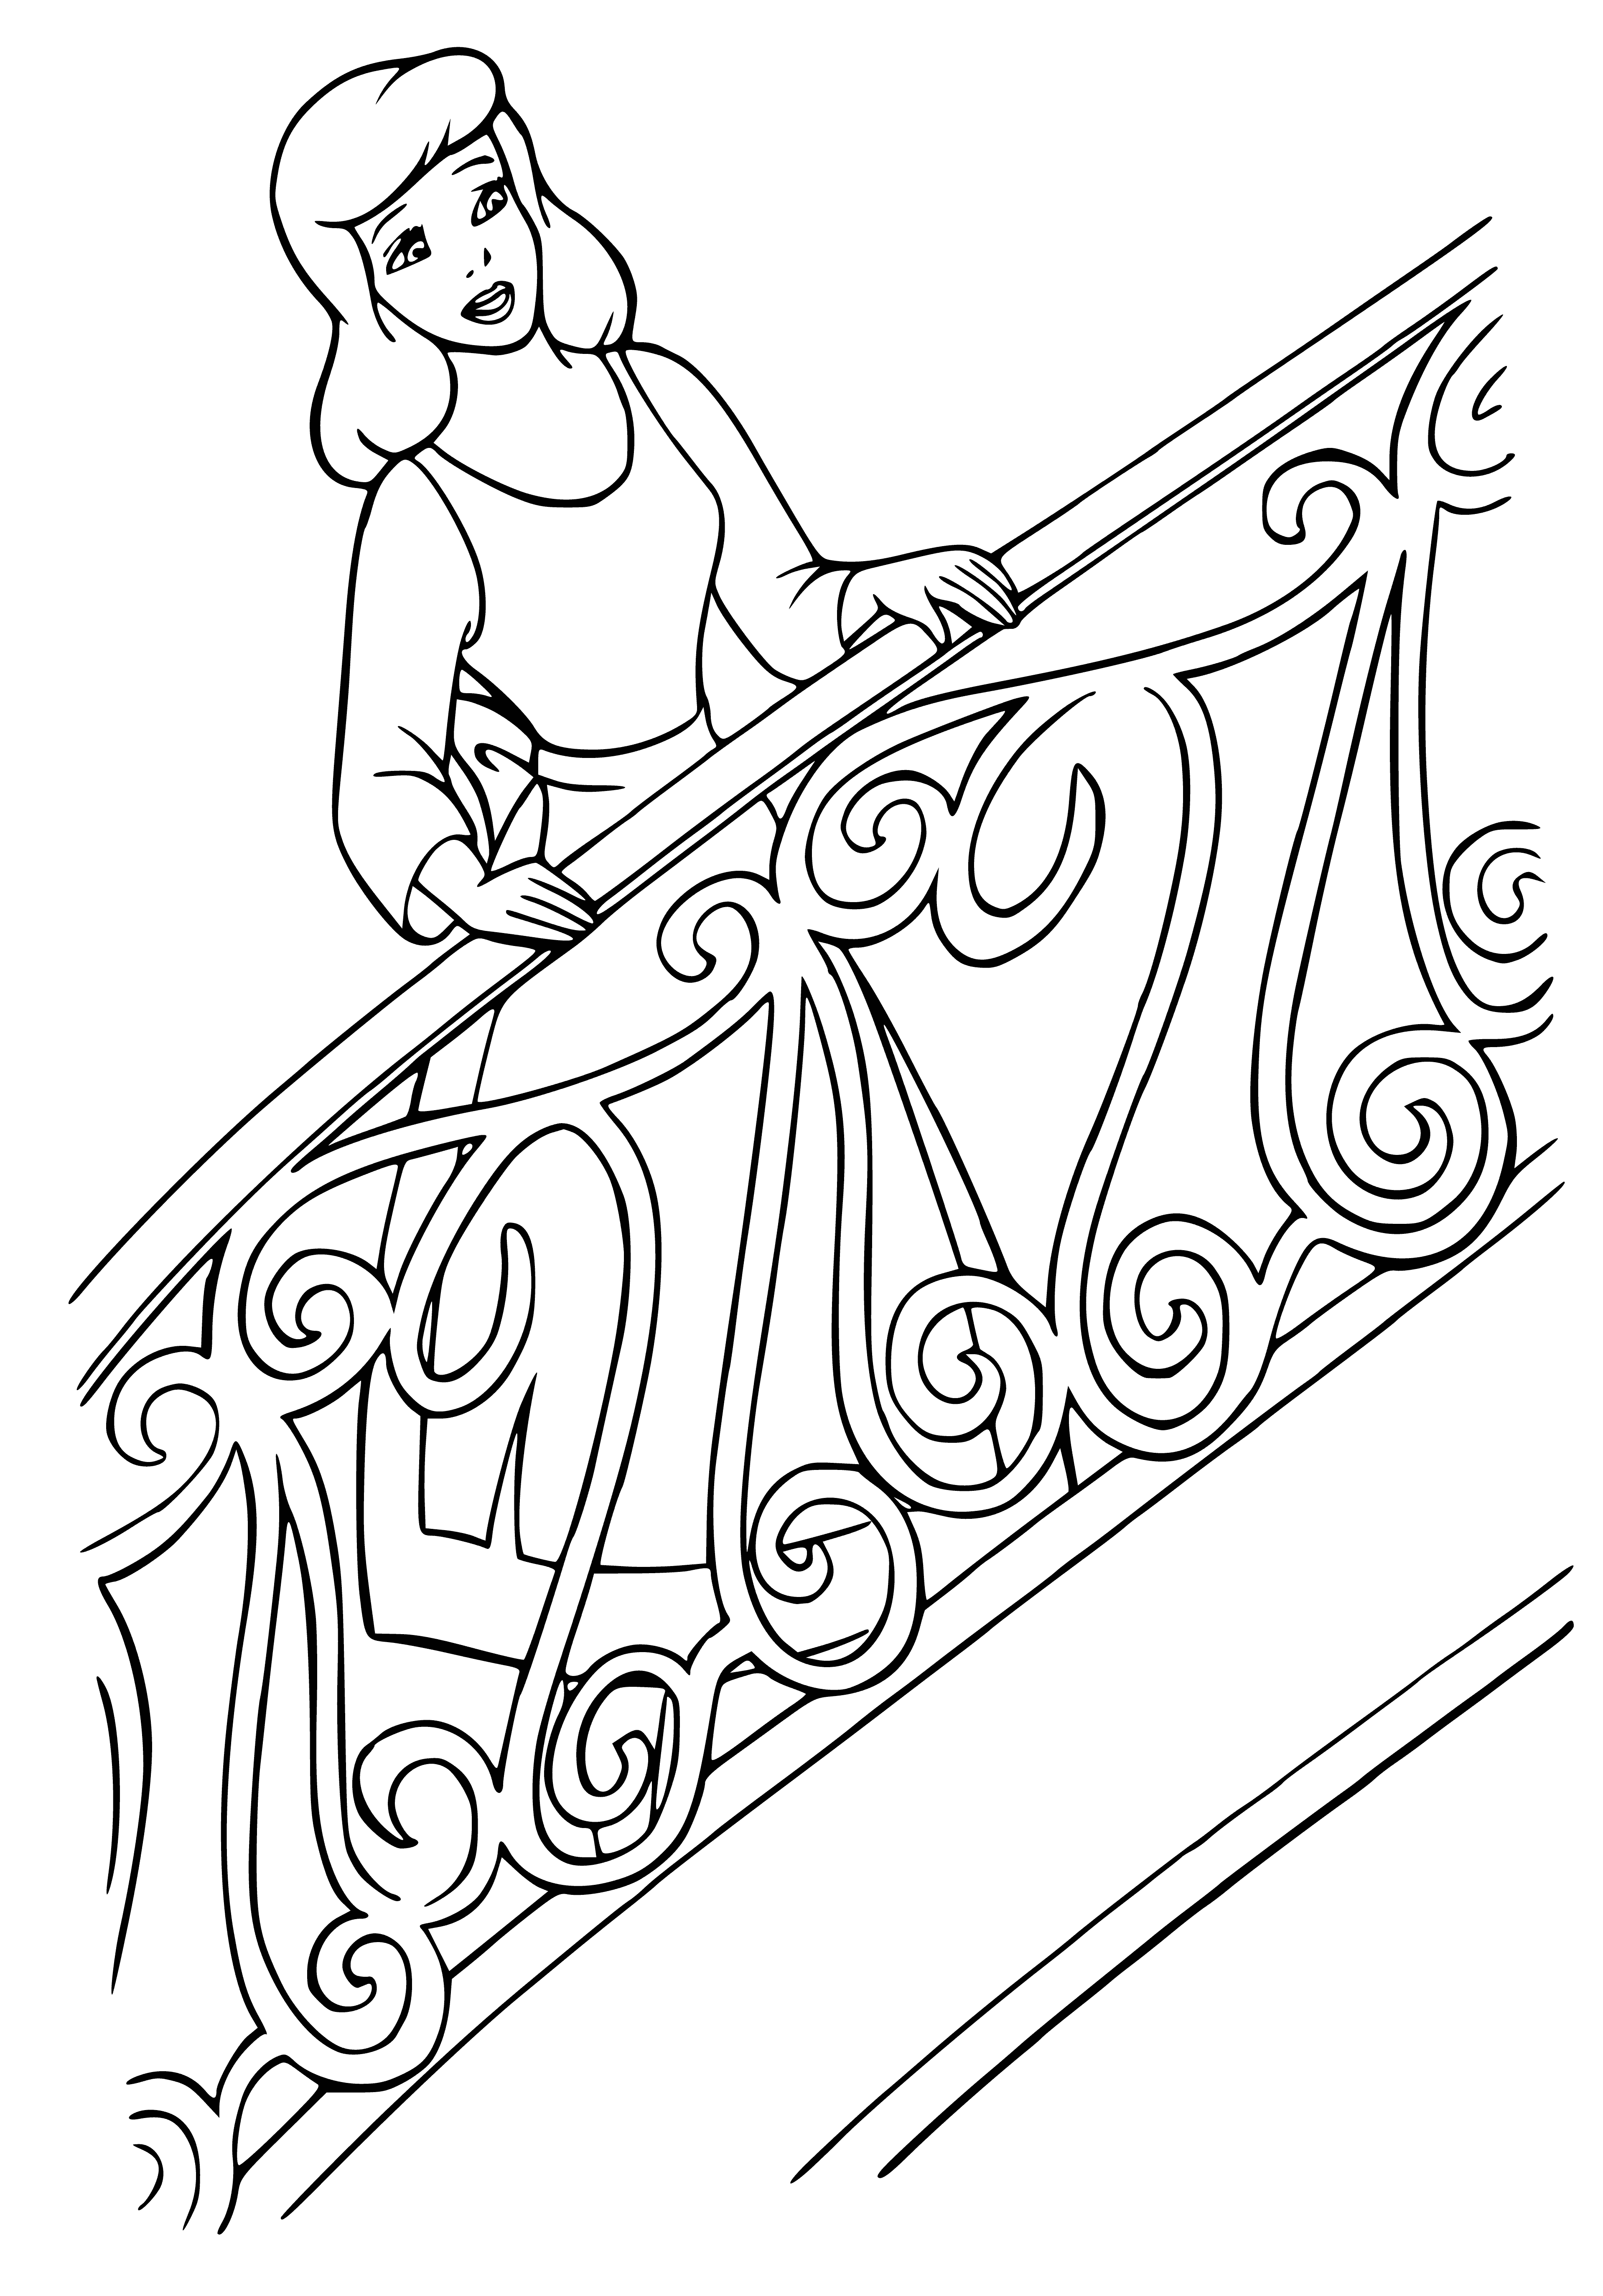 coloring page: Girl excitedly finds the perfect fit for glass slipper, fulfillment of her dreams. #GlassSlipperSaga